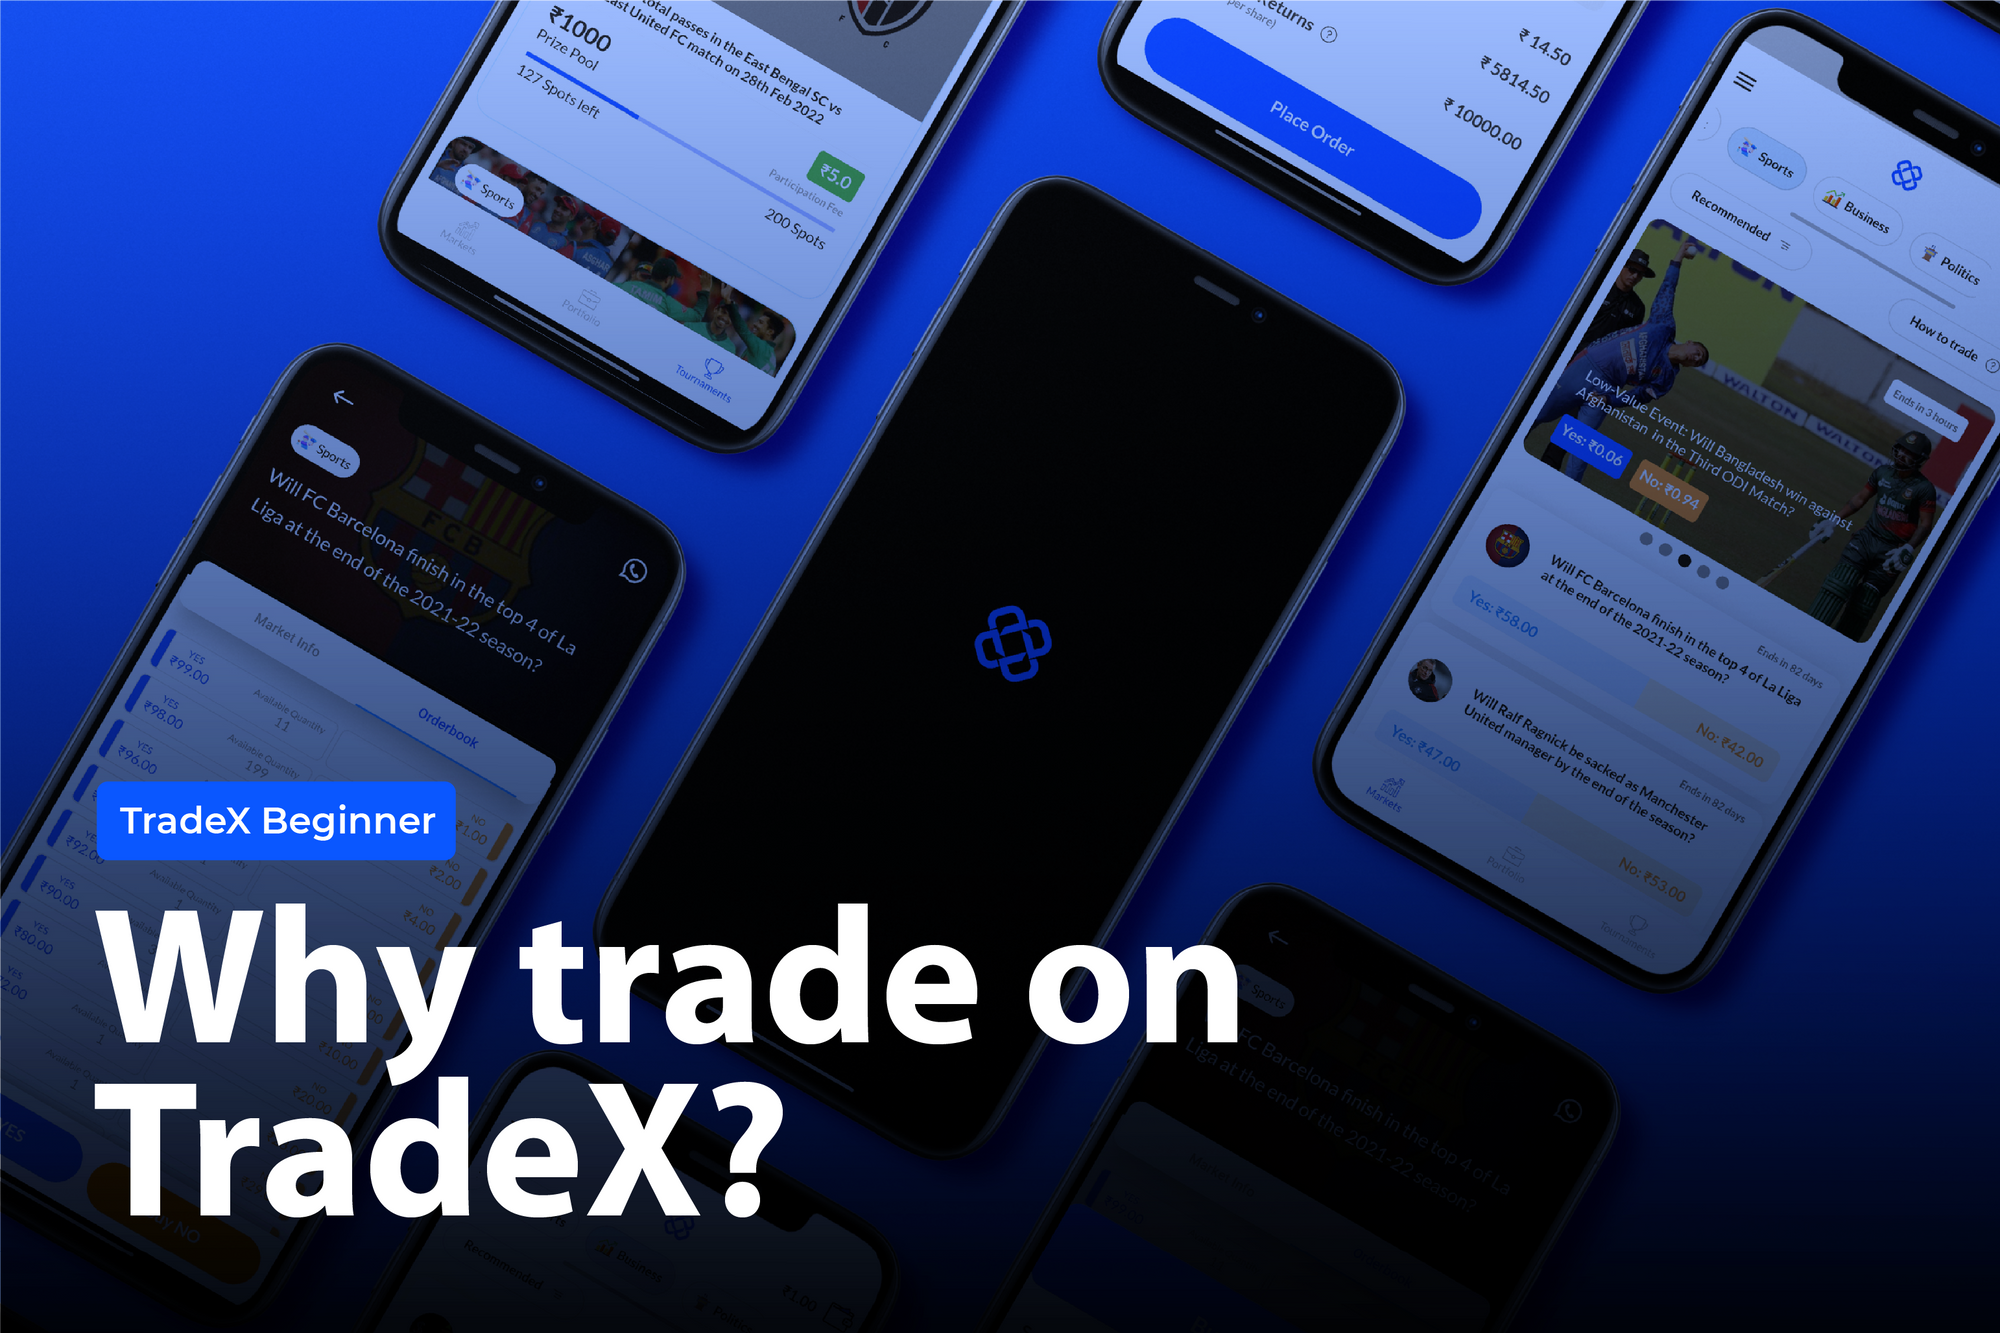 Why trade on TradeX?